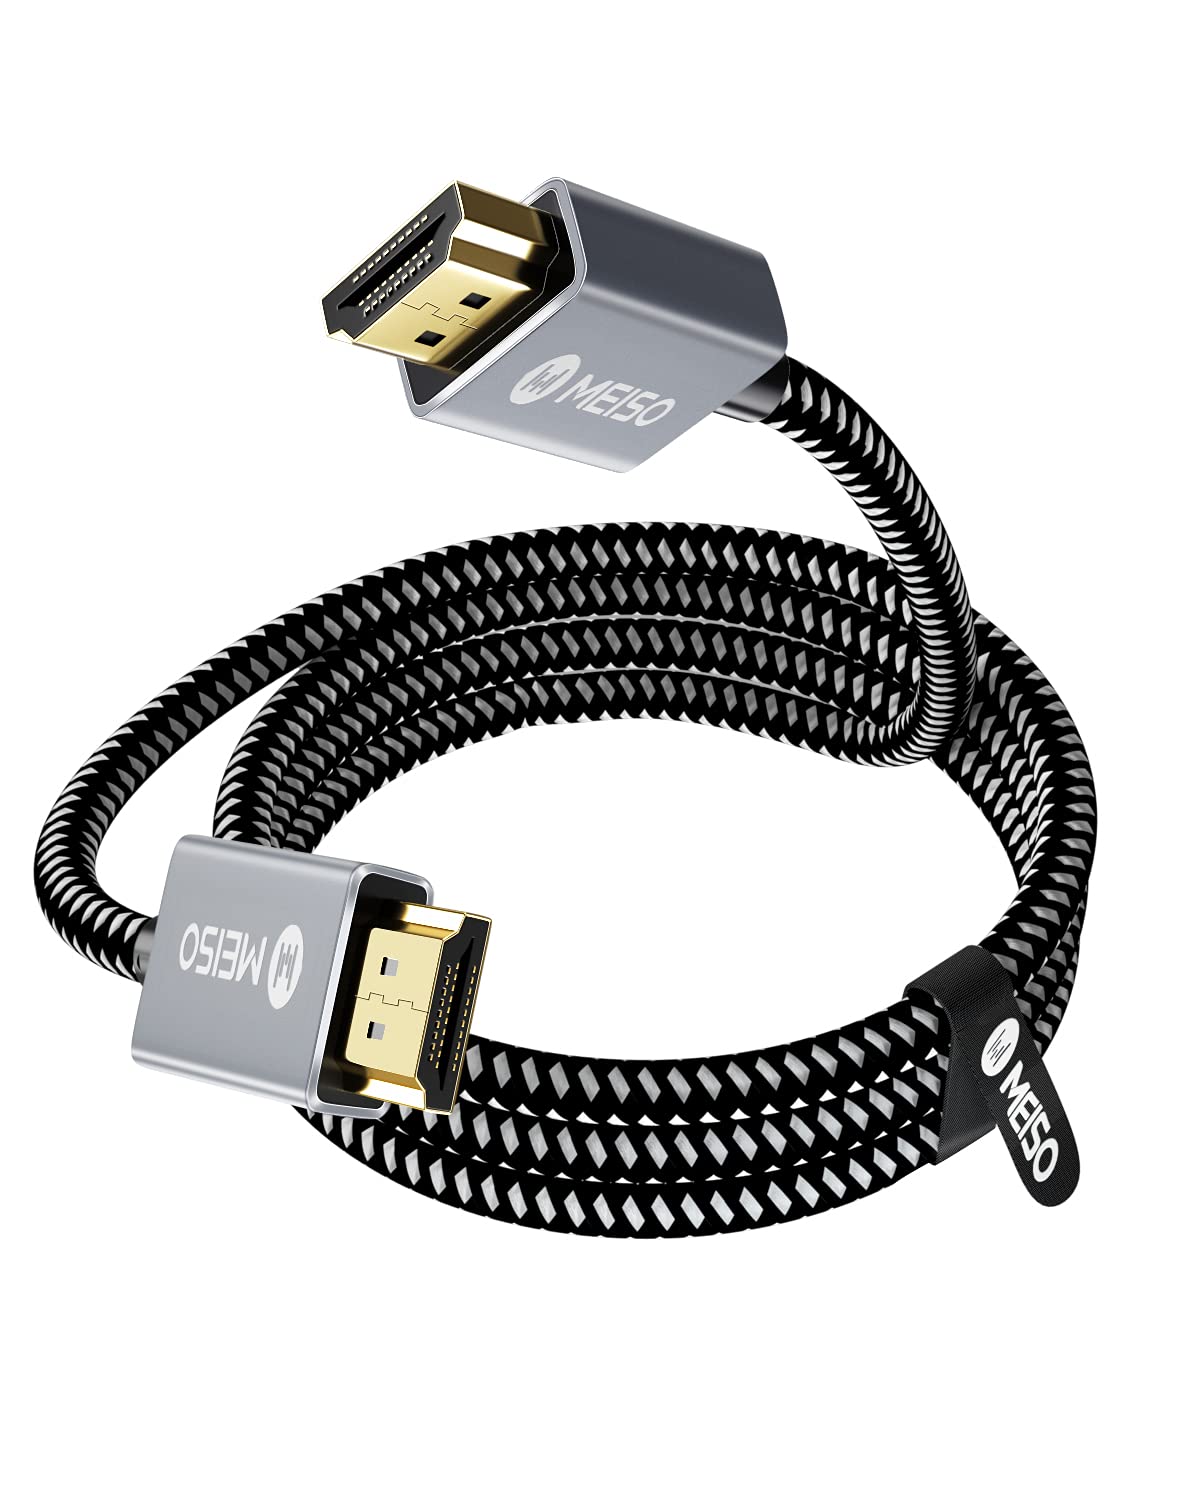 Mytrix HDMI to HDMI 8K HDMI Cable (5FT/6.6FT)